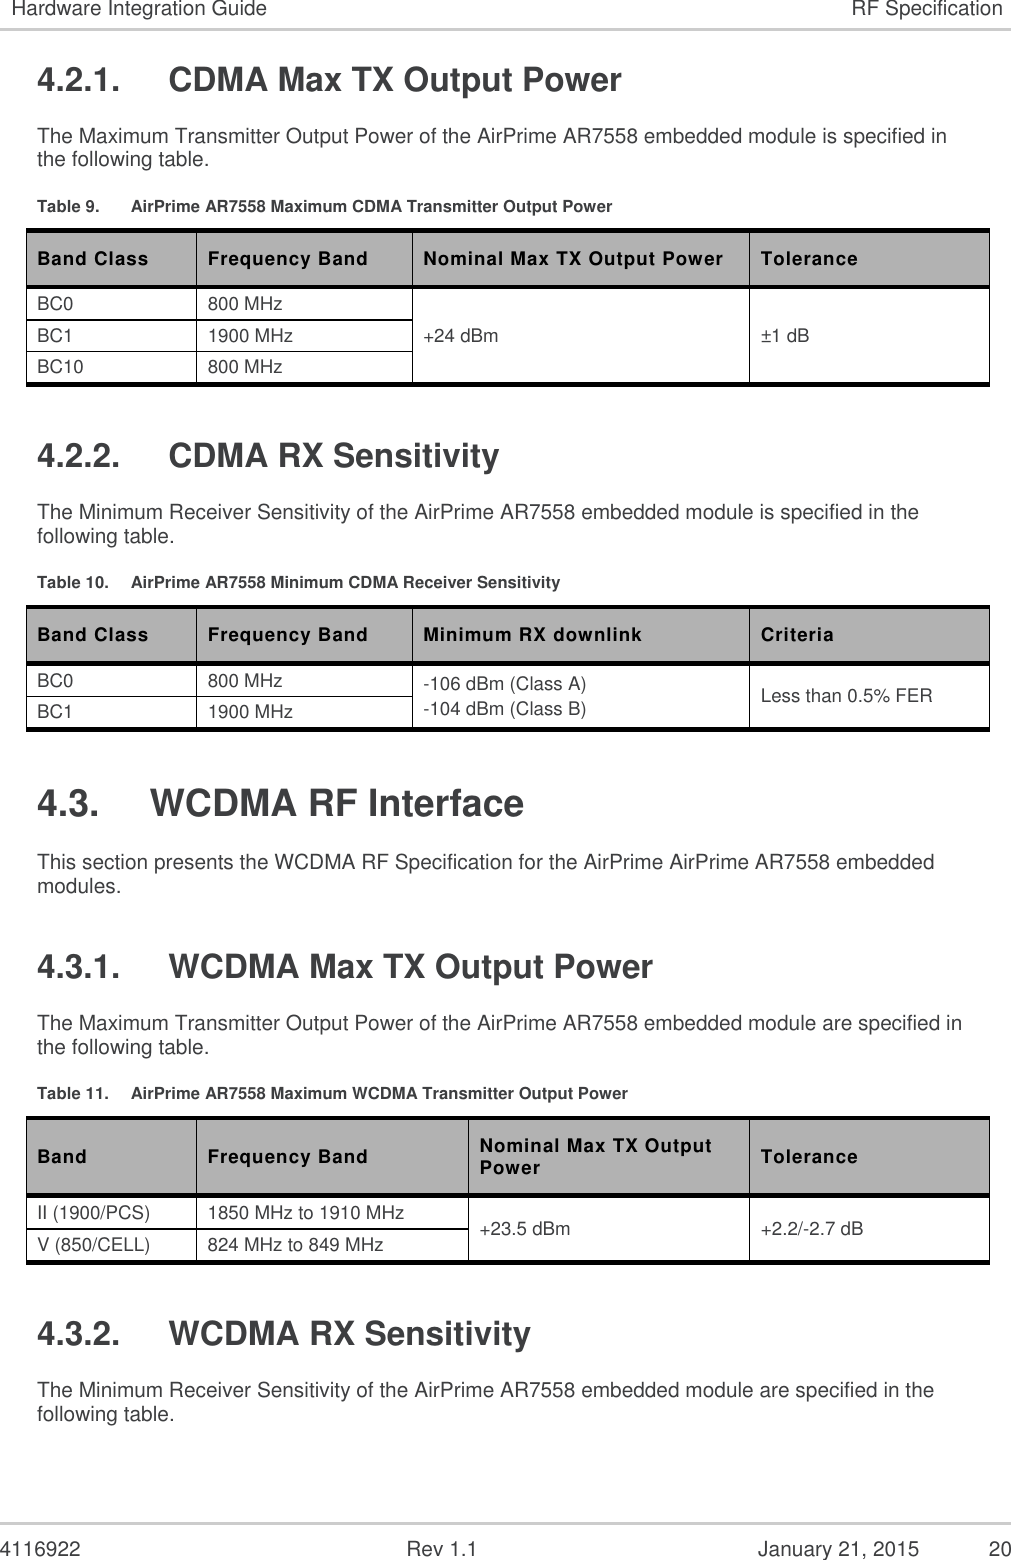   4116922              Rev 1.1          January 21, 2015  20 Hardware Integration Guide RF Specification 4.2.1.  CDMA Max TX Output Power The Maximum Transmitter Output Power of the AirPrime AR7558 embedded module is specified in the following table. Table 9.  AirPrime AR7558 Maximum CDMA Transmitter Output Power Band Class Frequency Band Nominal Max TX Output Power Tolerance  BC0 800 MHz +24 dBm ±1  dB  BC1 1900 MHz BC10 800 MHz 4.2.2.  CDMA RX Sensitivity The Minimum Receiver Sensitivity of the AirPrime AR7558 embedded module is specified in the following table. Table 10.  AirPrime AR7558 Minimum CDMA Receiver Sensitivity Band Class Frequency Band Minimum RX downlink Criteria BC0 800 MHz -106 dBm (Class A) -104 dBm (Class B) Less than 0.5% FER BC1 1900 MHz 4.3.  WCDMA RF Interface This section presents the WCDMA RF Specification for the AirPrime AirPrime AR7558 embedded modules. 4.3.1.  WCDMA Max TX Output Power The Maximum Transmitter Output Power of the AirPrime AR7558 embedded module are specified in the following table. Table 11.  AirPrime AR7558 Maximum WCDMA Transmitter Output Power Band Frequency Band Nominal Max TX Output Power Tolerance II (1900/PCS) 1850 MHz to 1910 MHz +23.5 dBm +2.2/-2.7 dB  V (850/CELL) 824 MHz to 849 MHz 4.3.2.  WCDMA RX Sensitivity The Minimum Receiver Sensitivity of the AirPrime AR7558 embedded module are specified in the following table. 